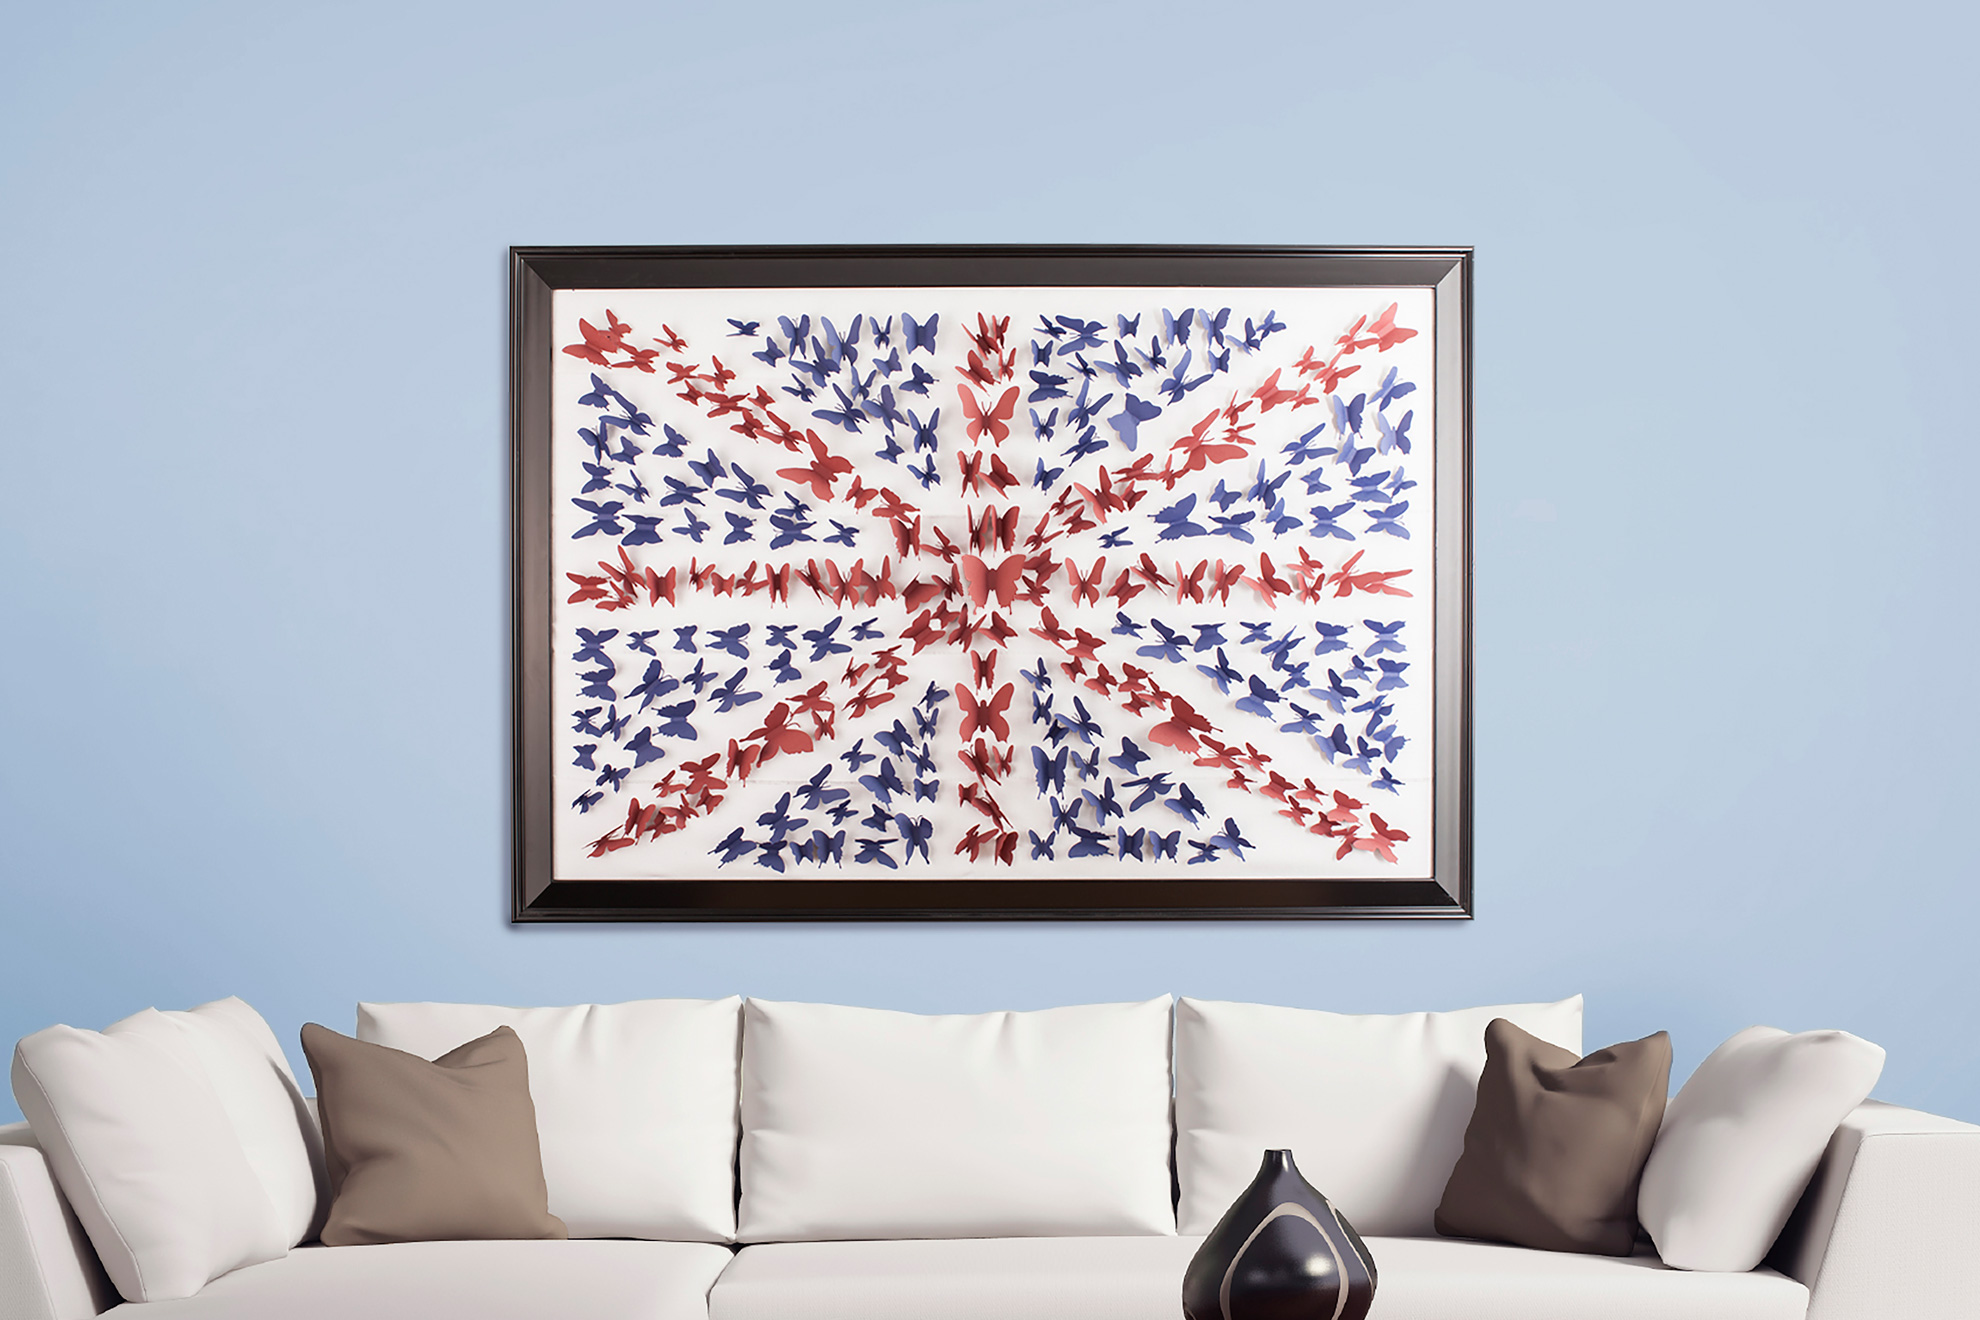 British flag wall art made out of paper butterflies